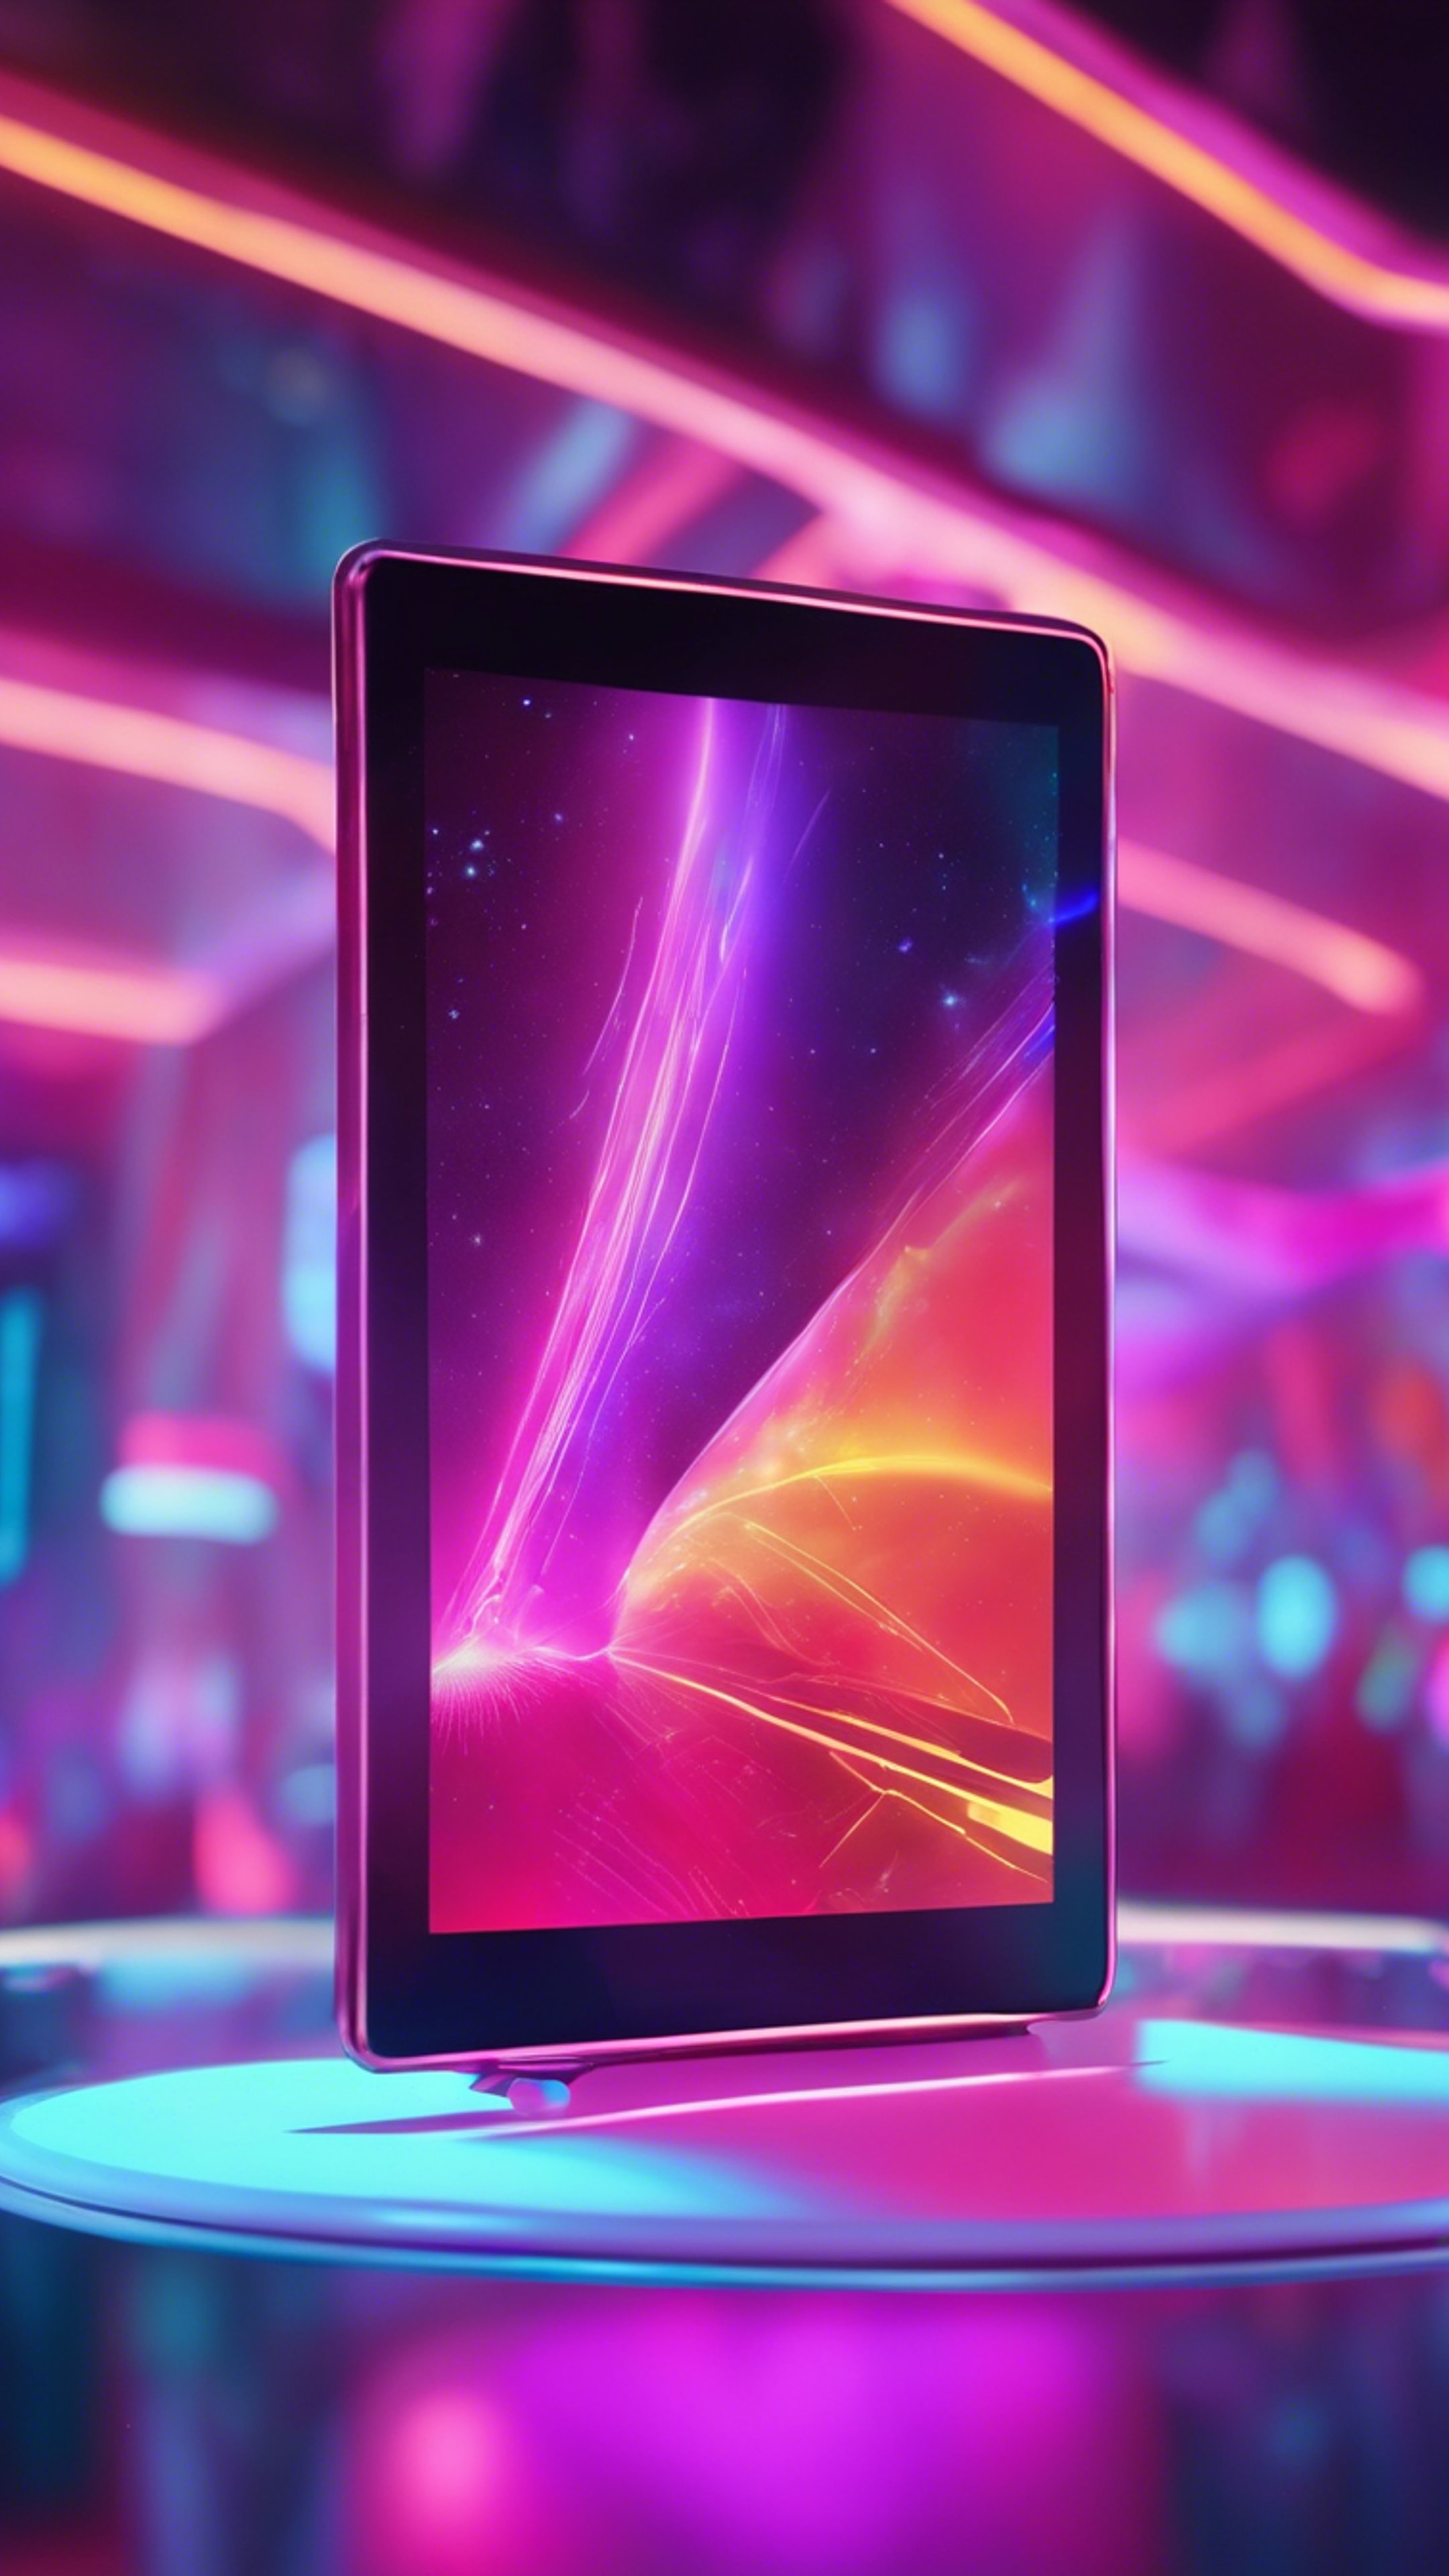 An ultra-modern tablet with a holographic touch screen floating in a futuristic, vividly colored neon environment. Обои[25bfd648fdfb4eaf80d5]